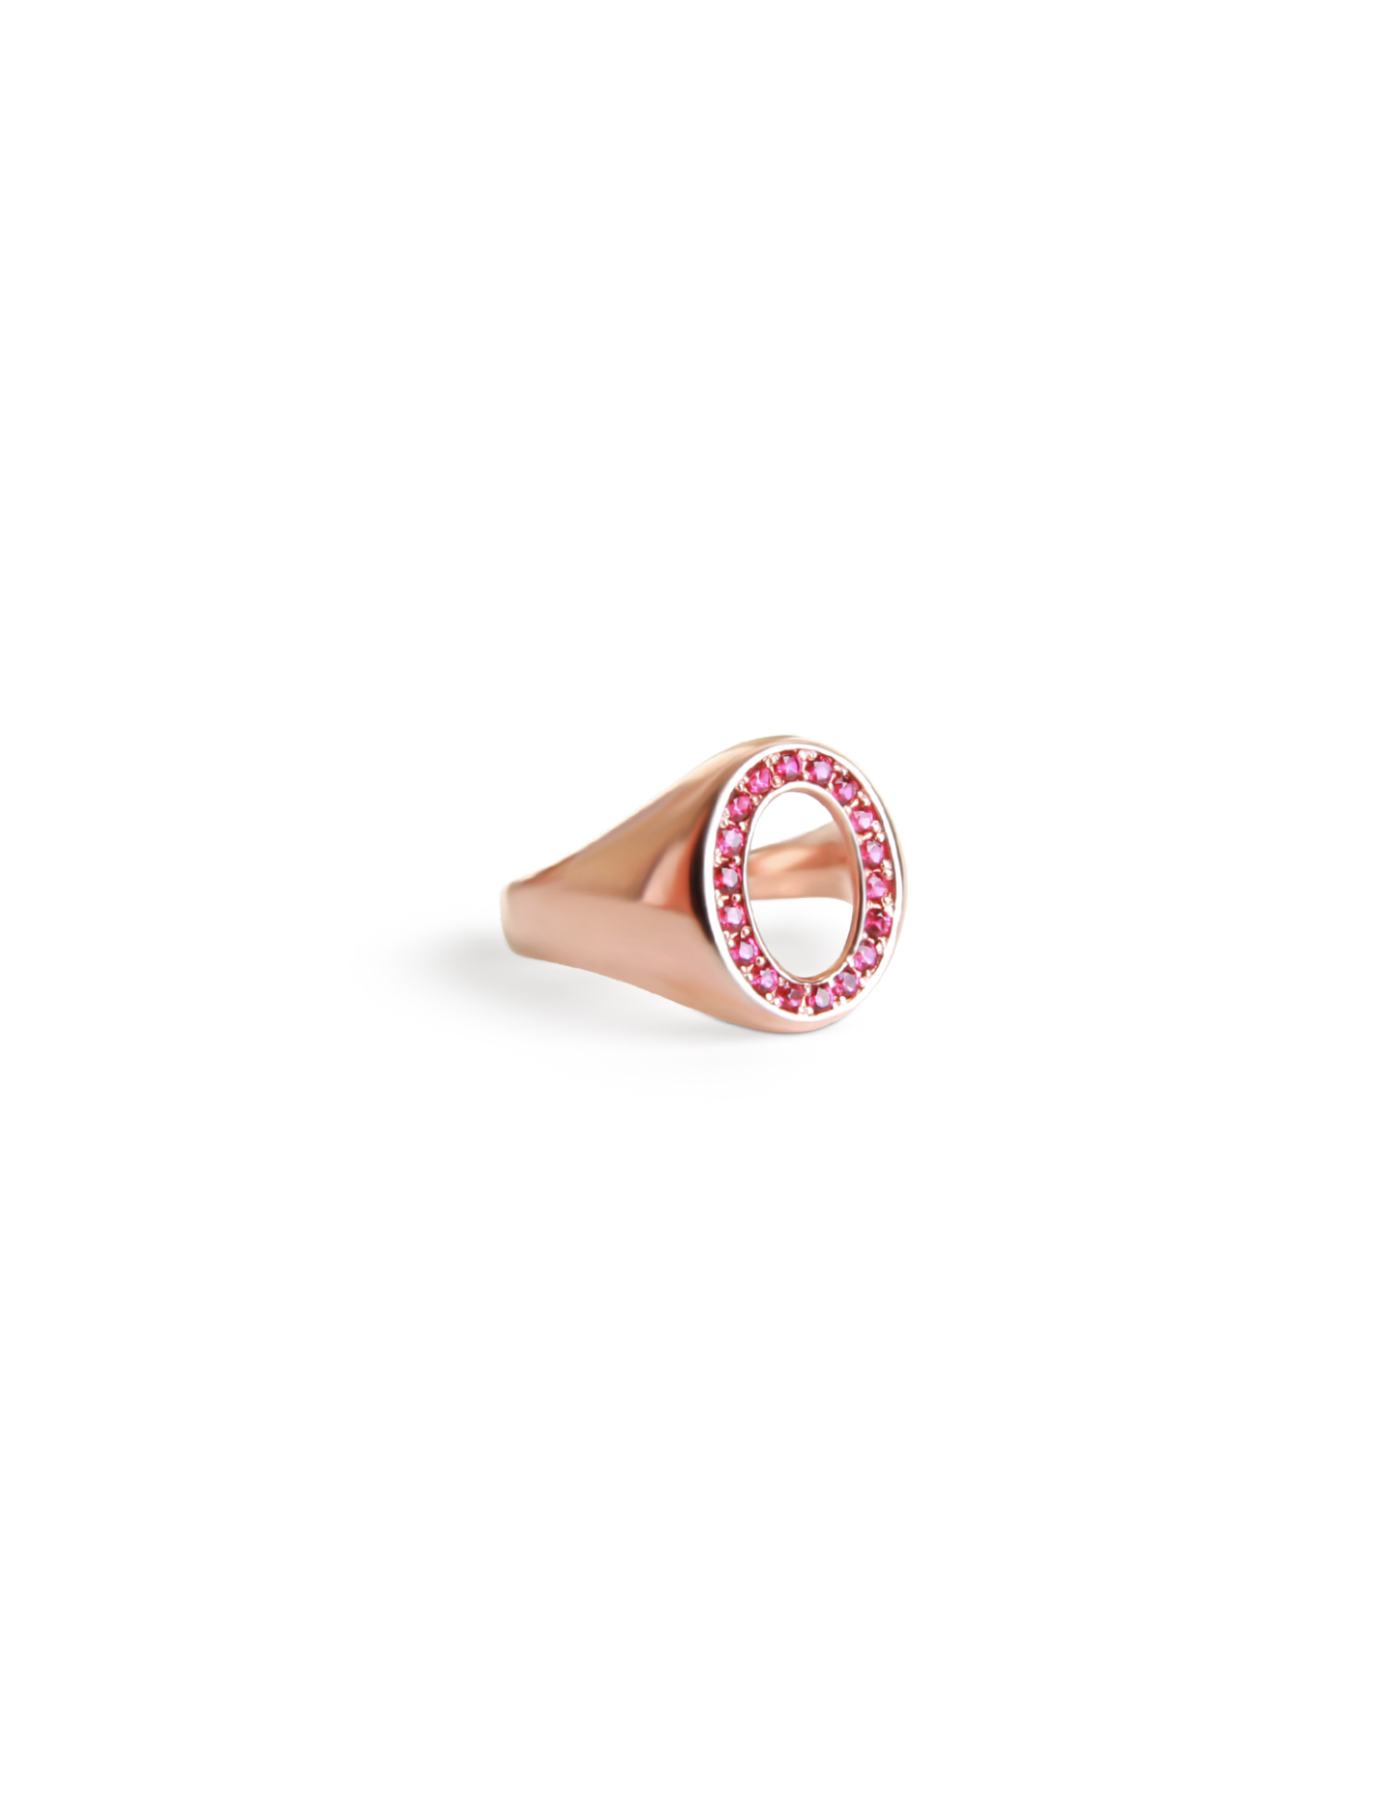 LY Ring (Ruby)